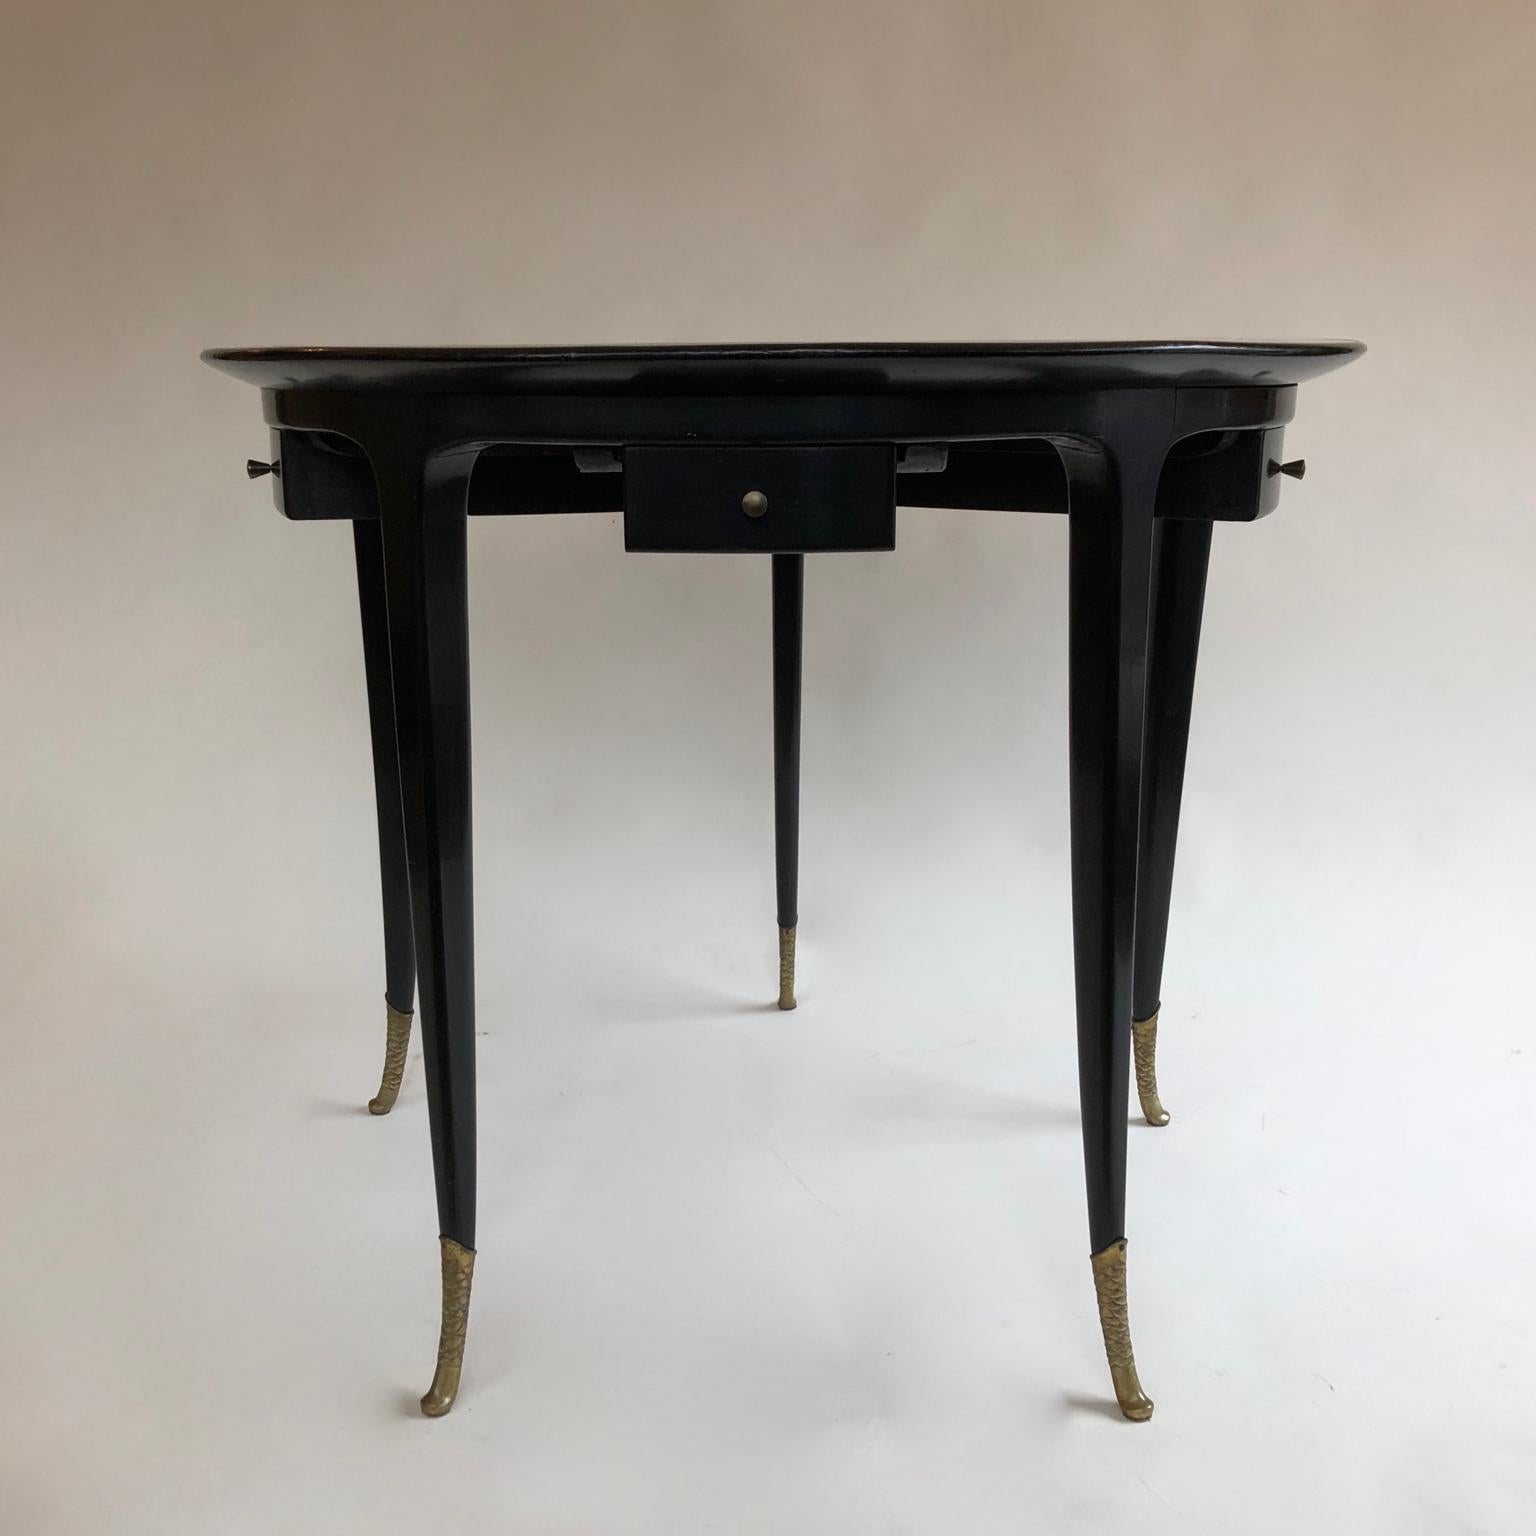 Superb 1940s circular black ebonised Italian games table with five small drawers, old black vinyl based top and elegant brass sabots. Black circular glass top available.